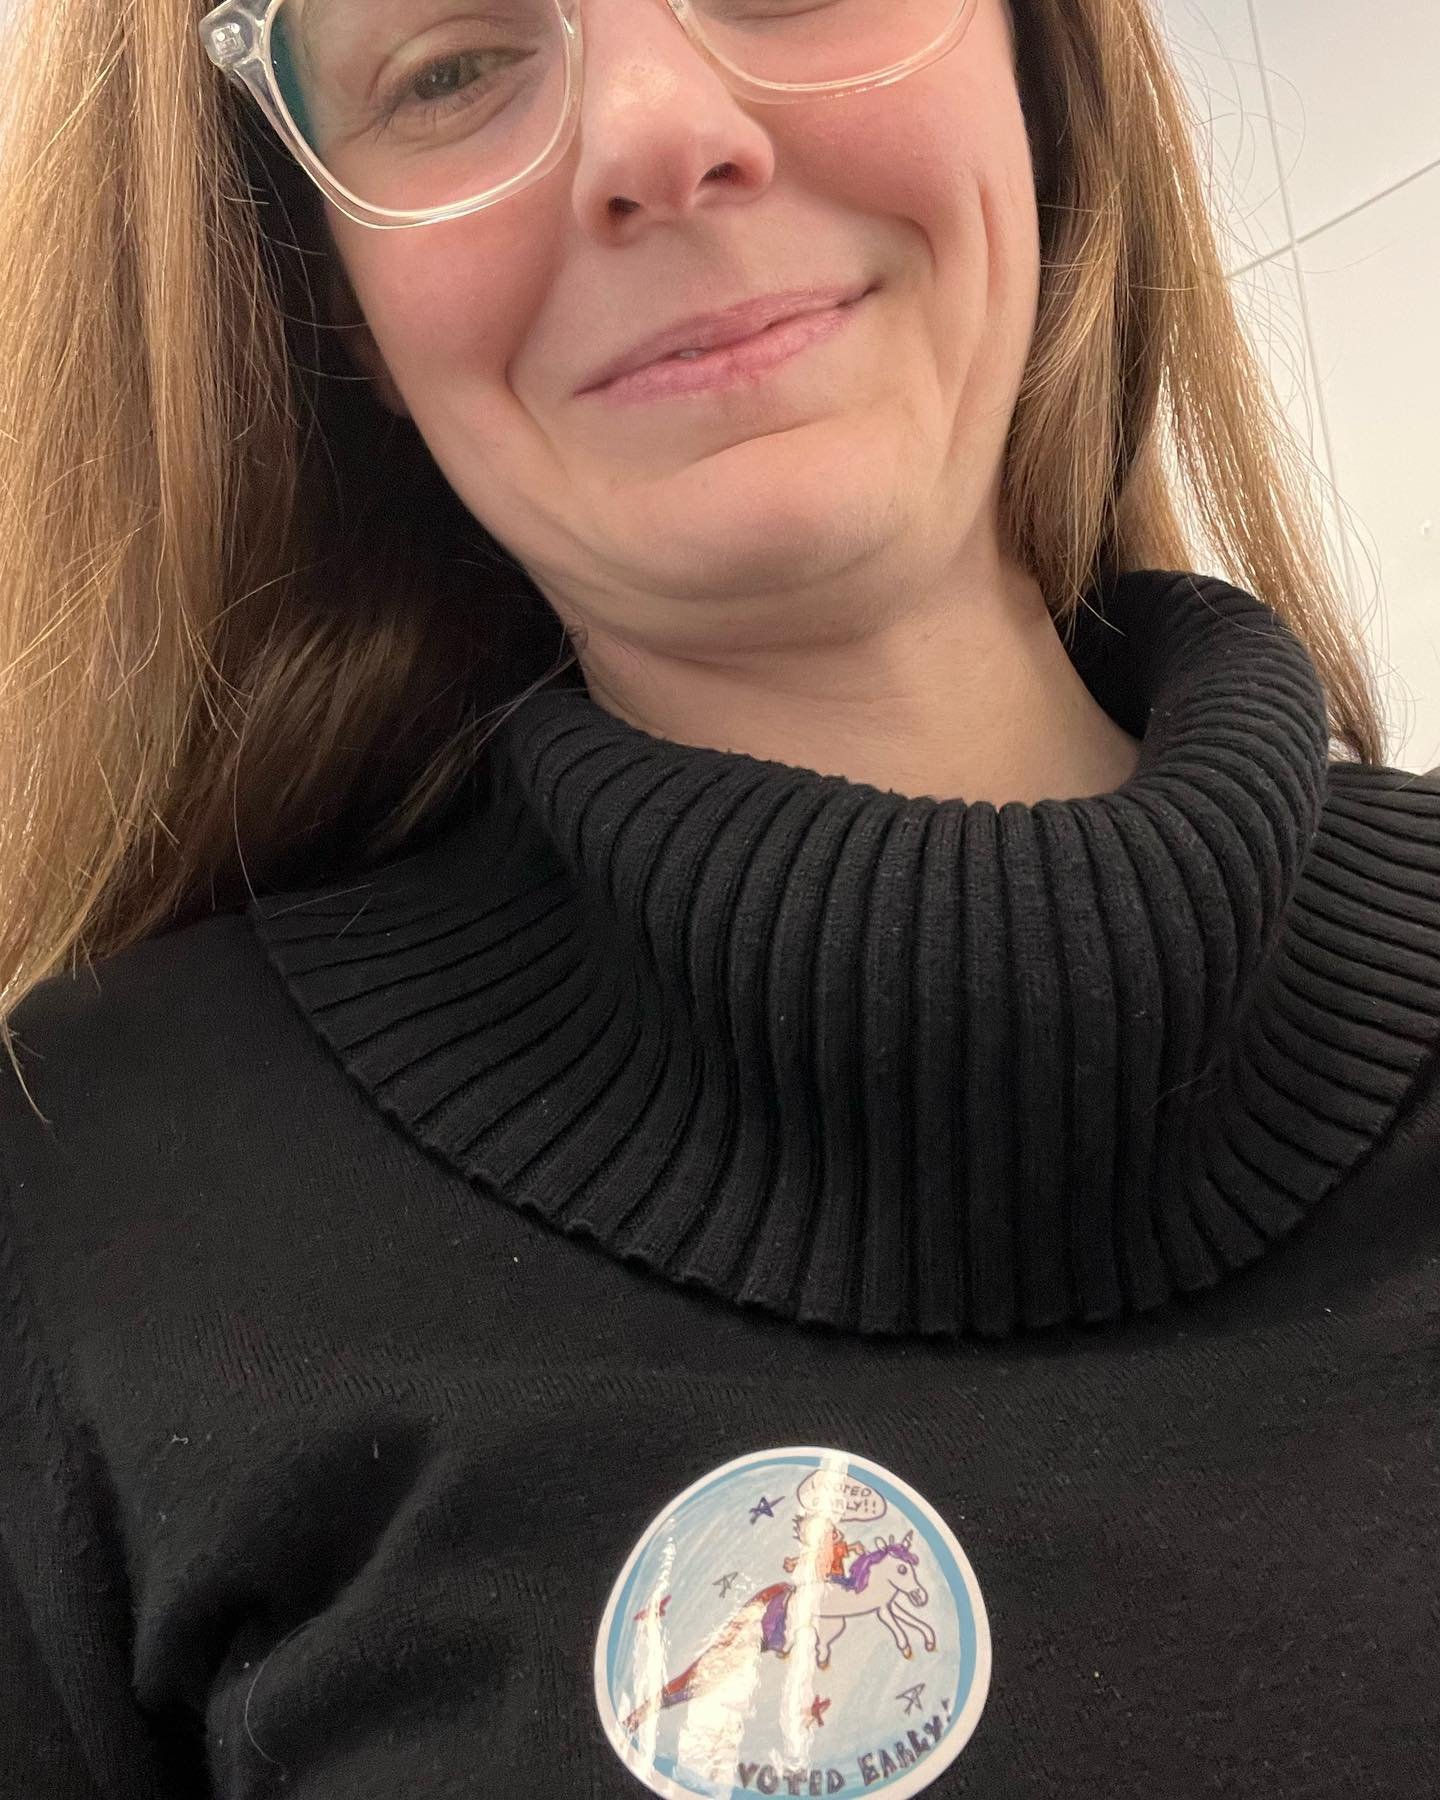 If you vote early, you can get this rad sticker! BTW, it took less than five minutes to vote early.  You can vote at any early voting in Wake County. 

And then stop by your nearest public library! Even time I visit one, I&rsquo;m so proud to live in